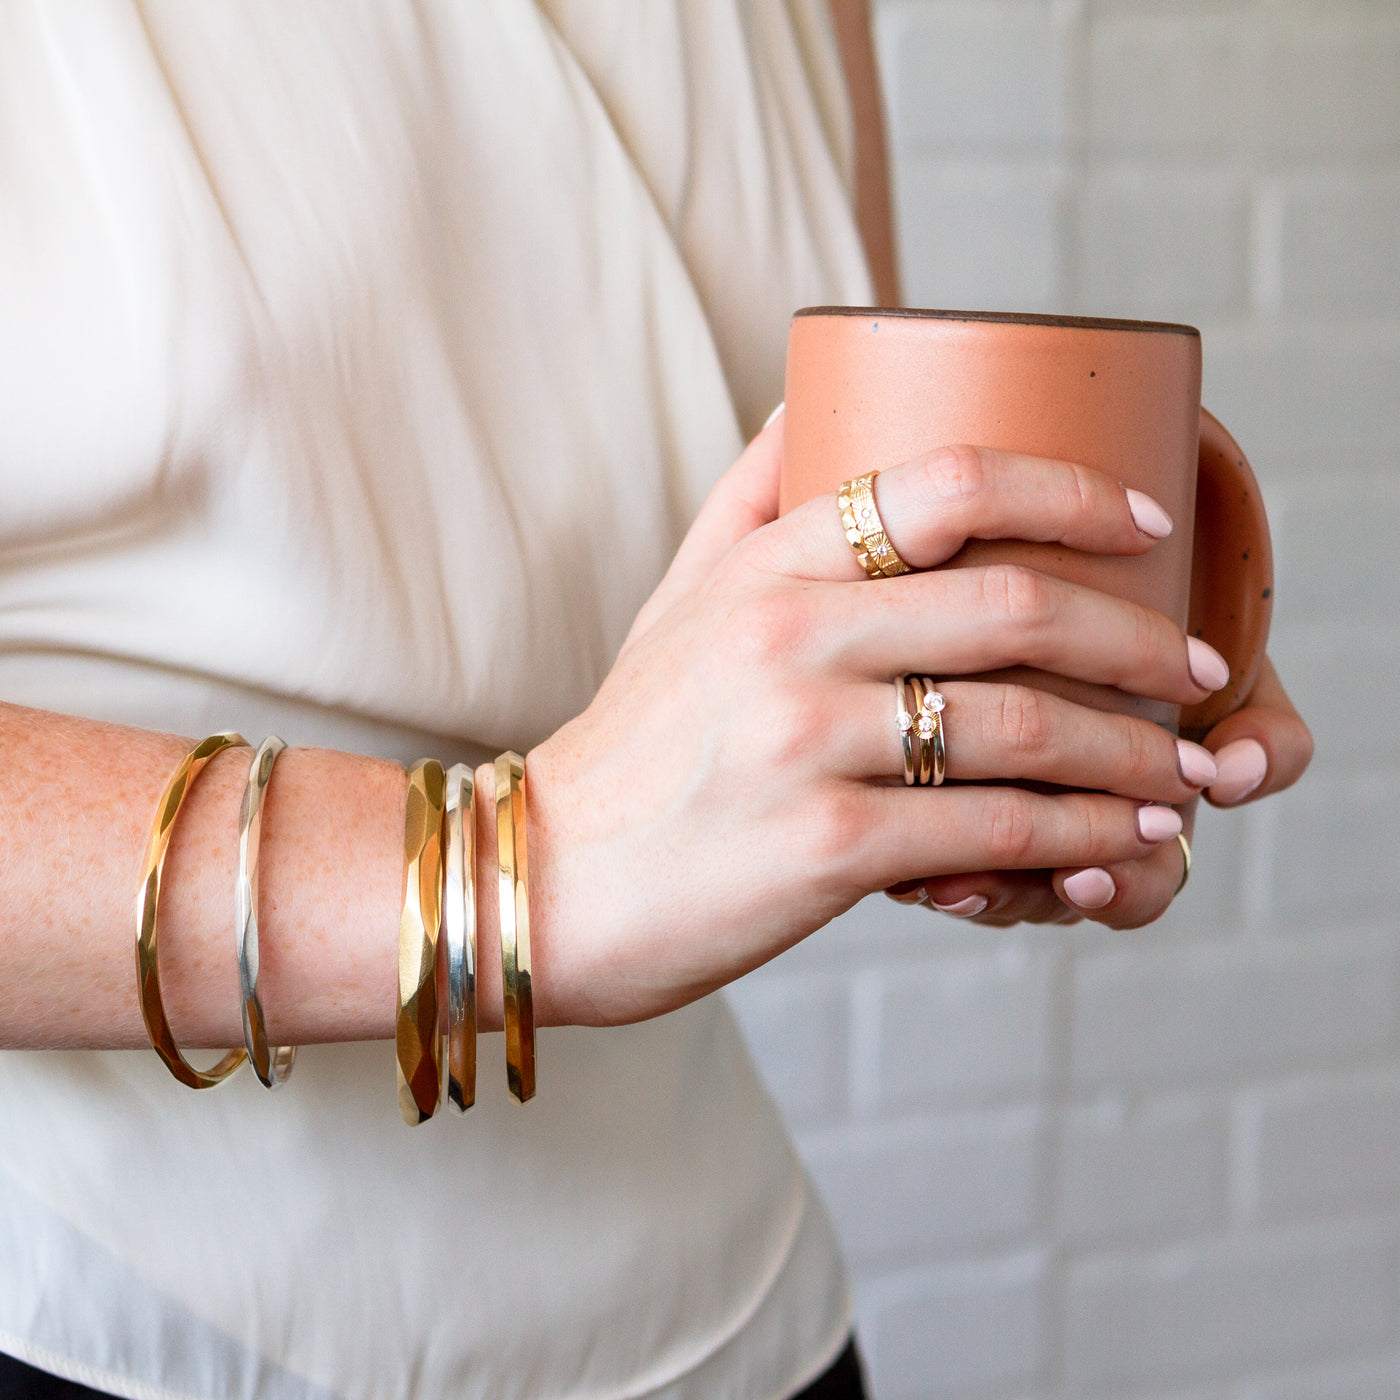 A model wears assorted silver and bronze bracelets including the silver thin denali bangle